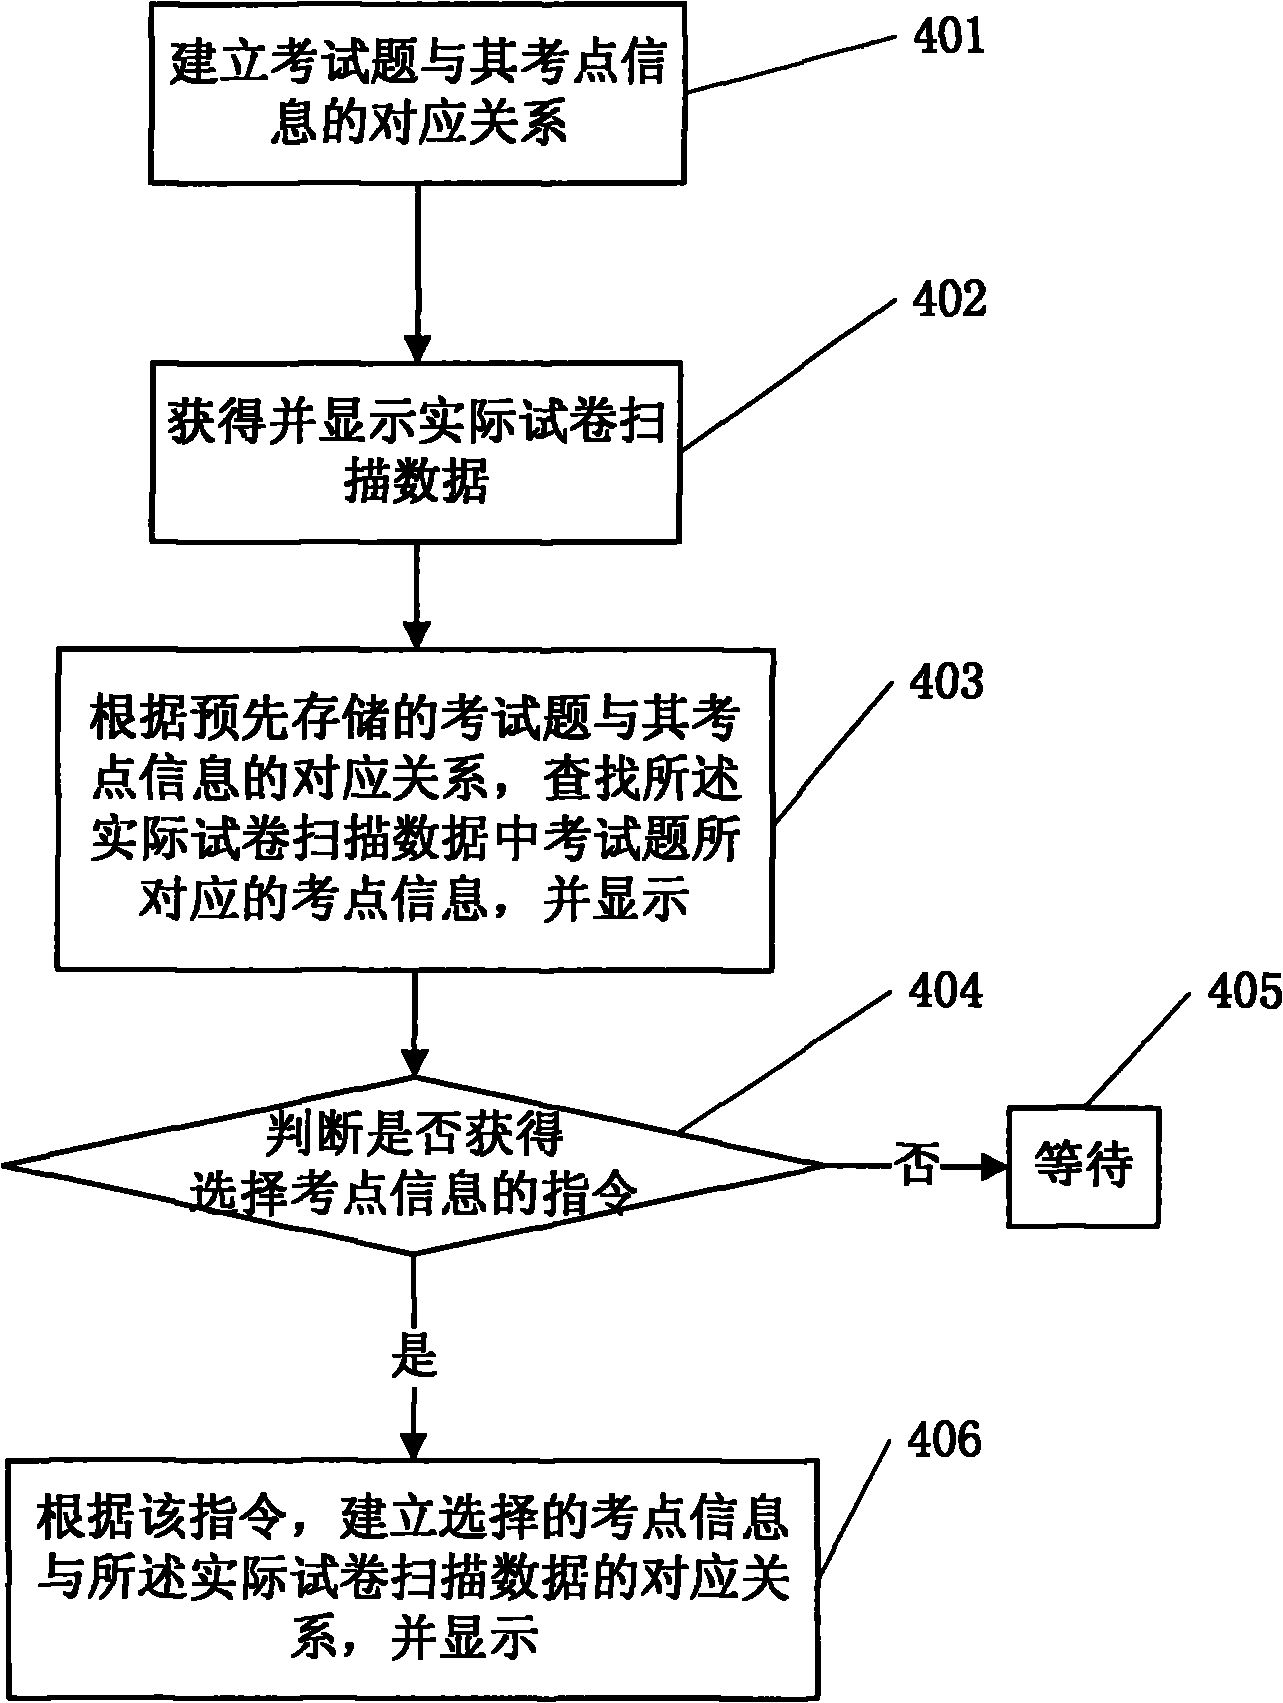 Examination paper reading system and marking implementation method thereof